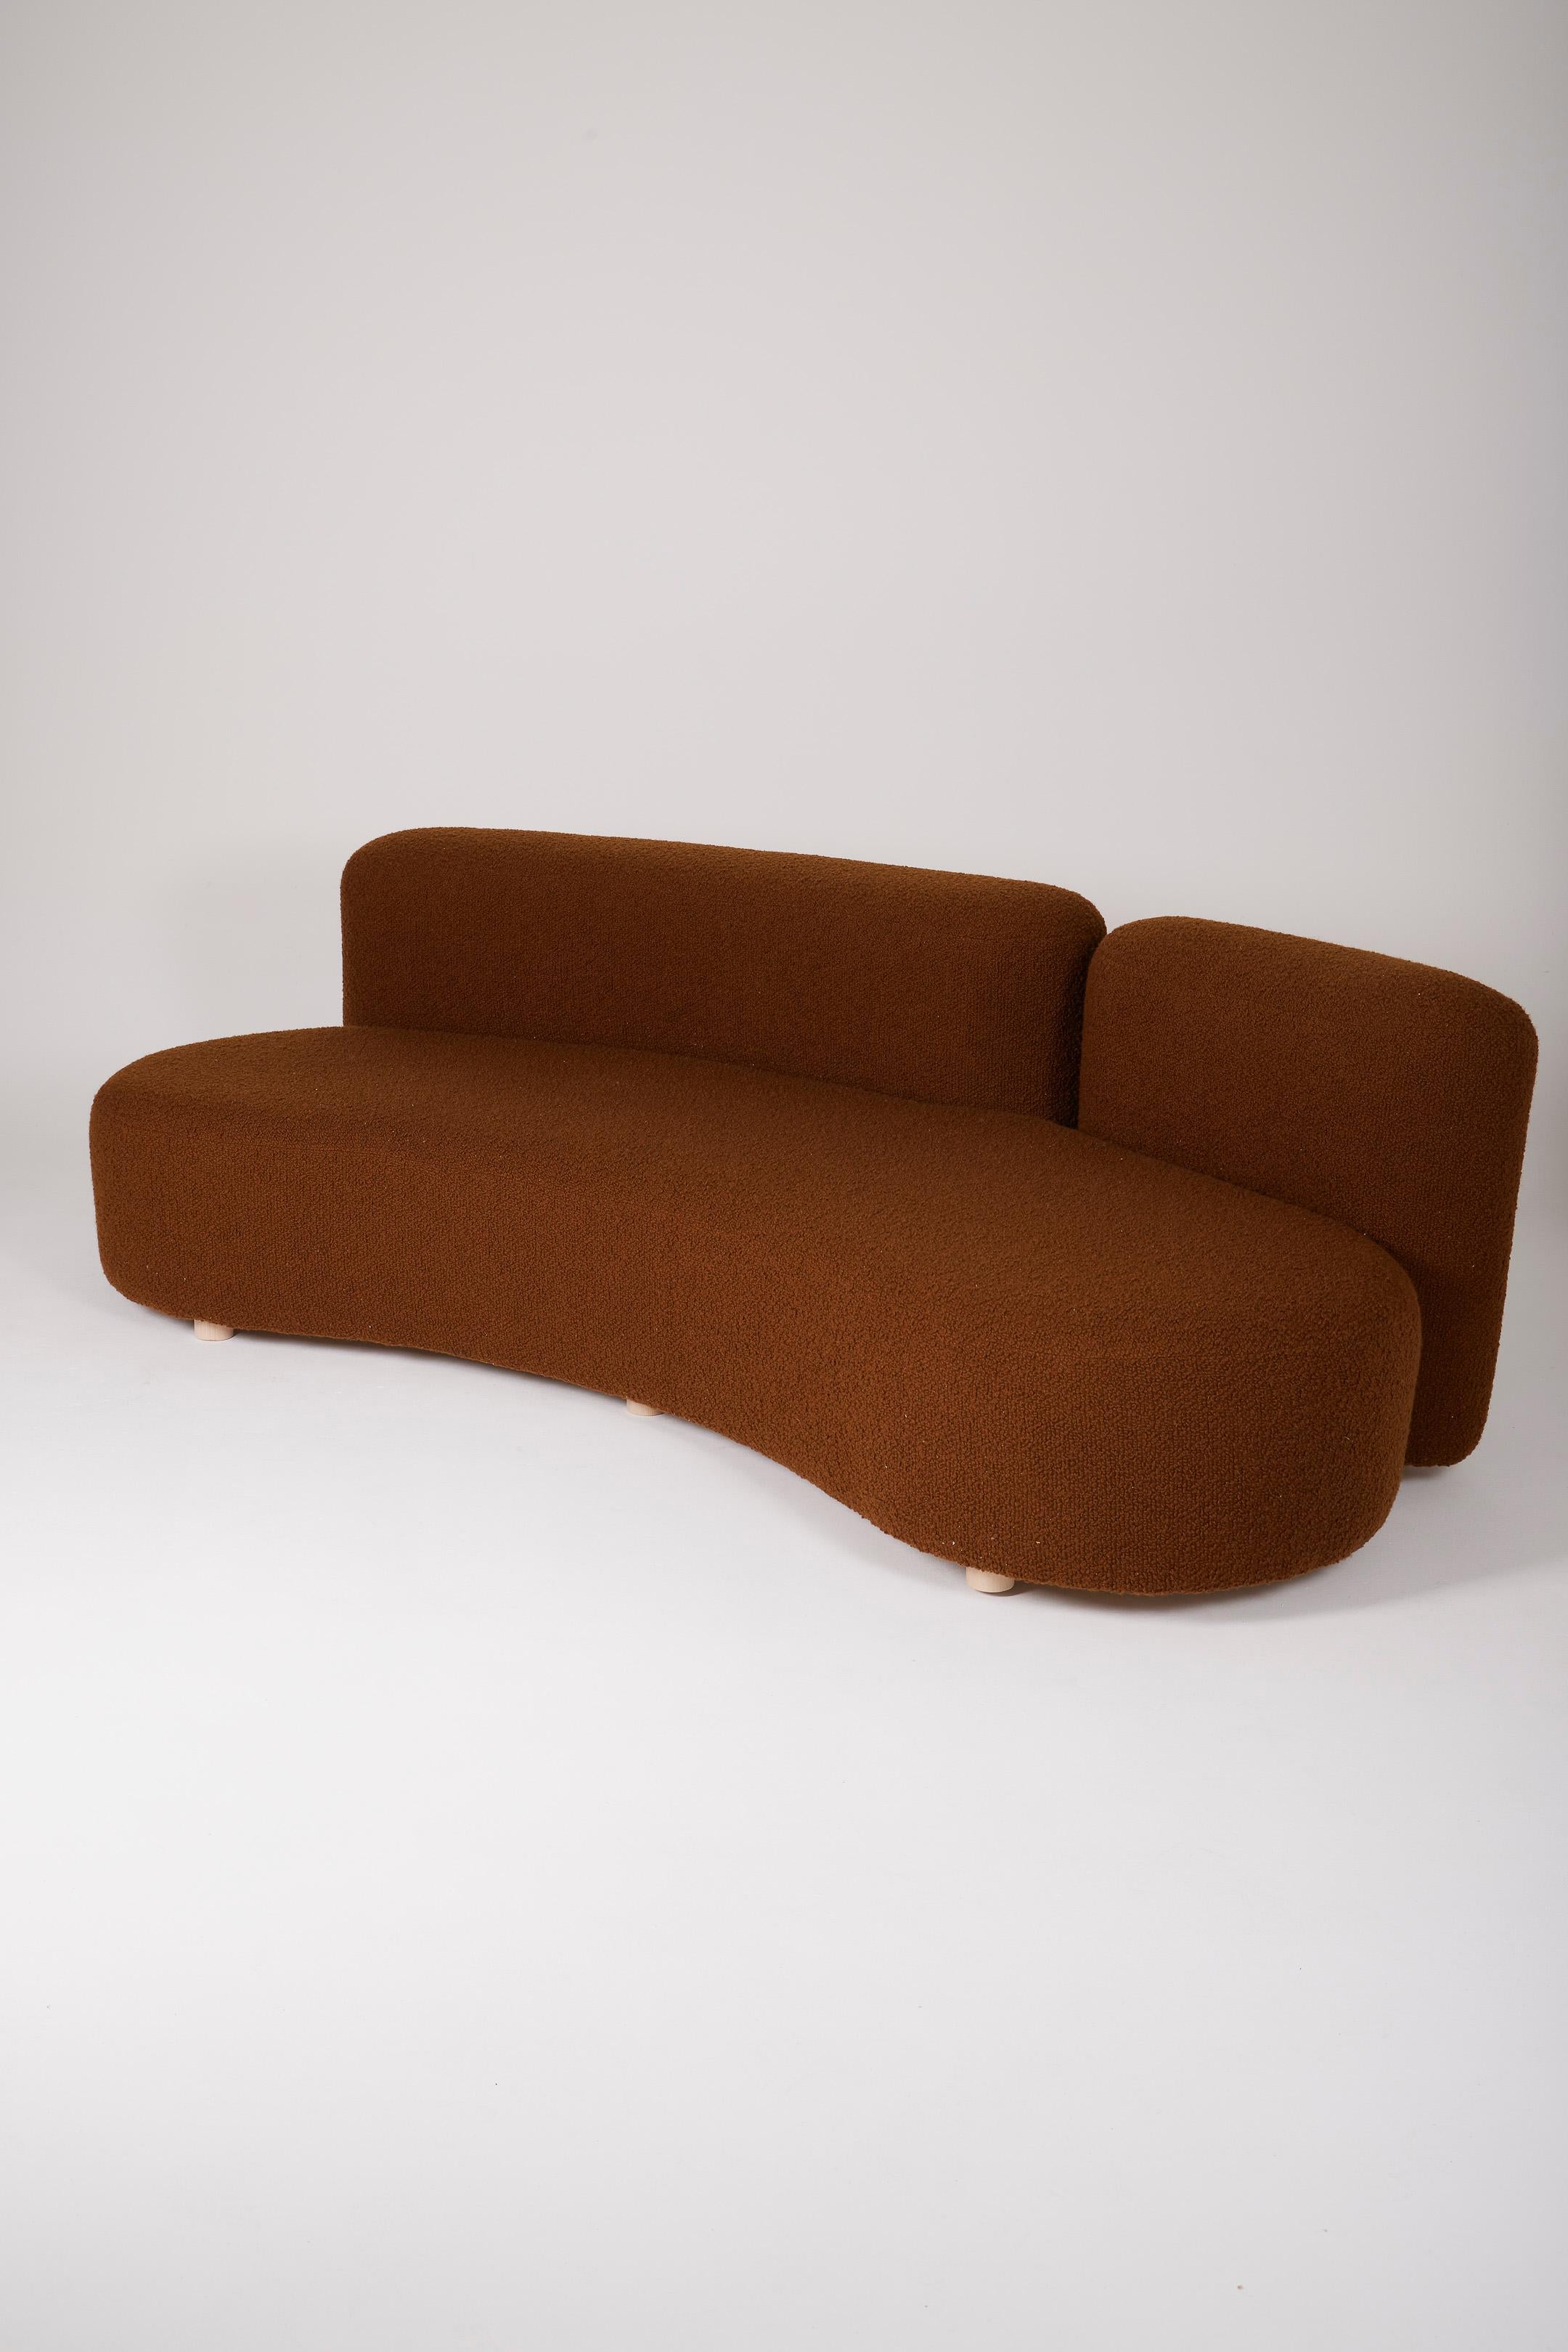 3-seater brown bouclé fabric sofa from the 1970s. The sofa comes with its 6 cushions. Excellent condition.
DV525